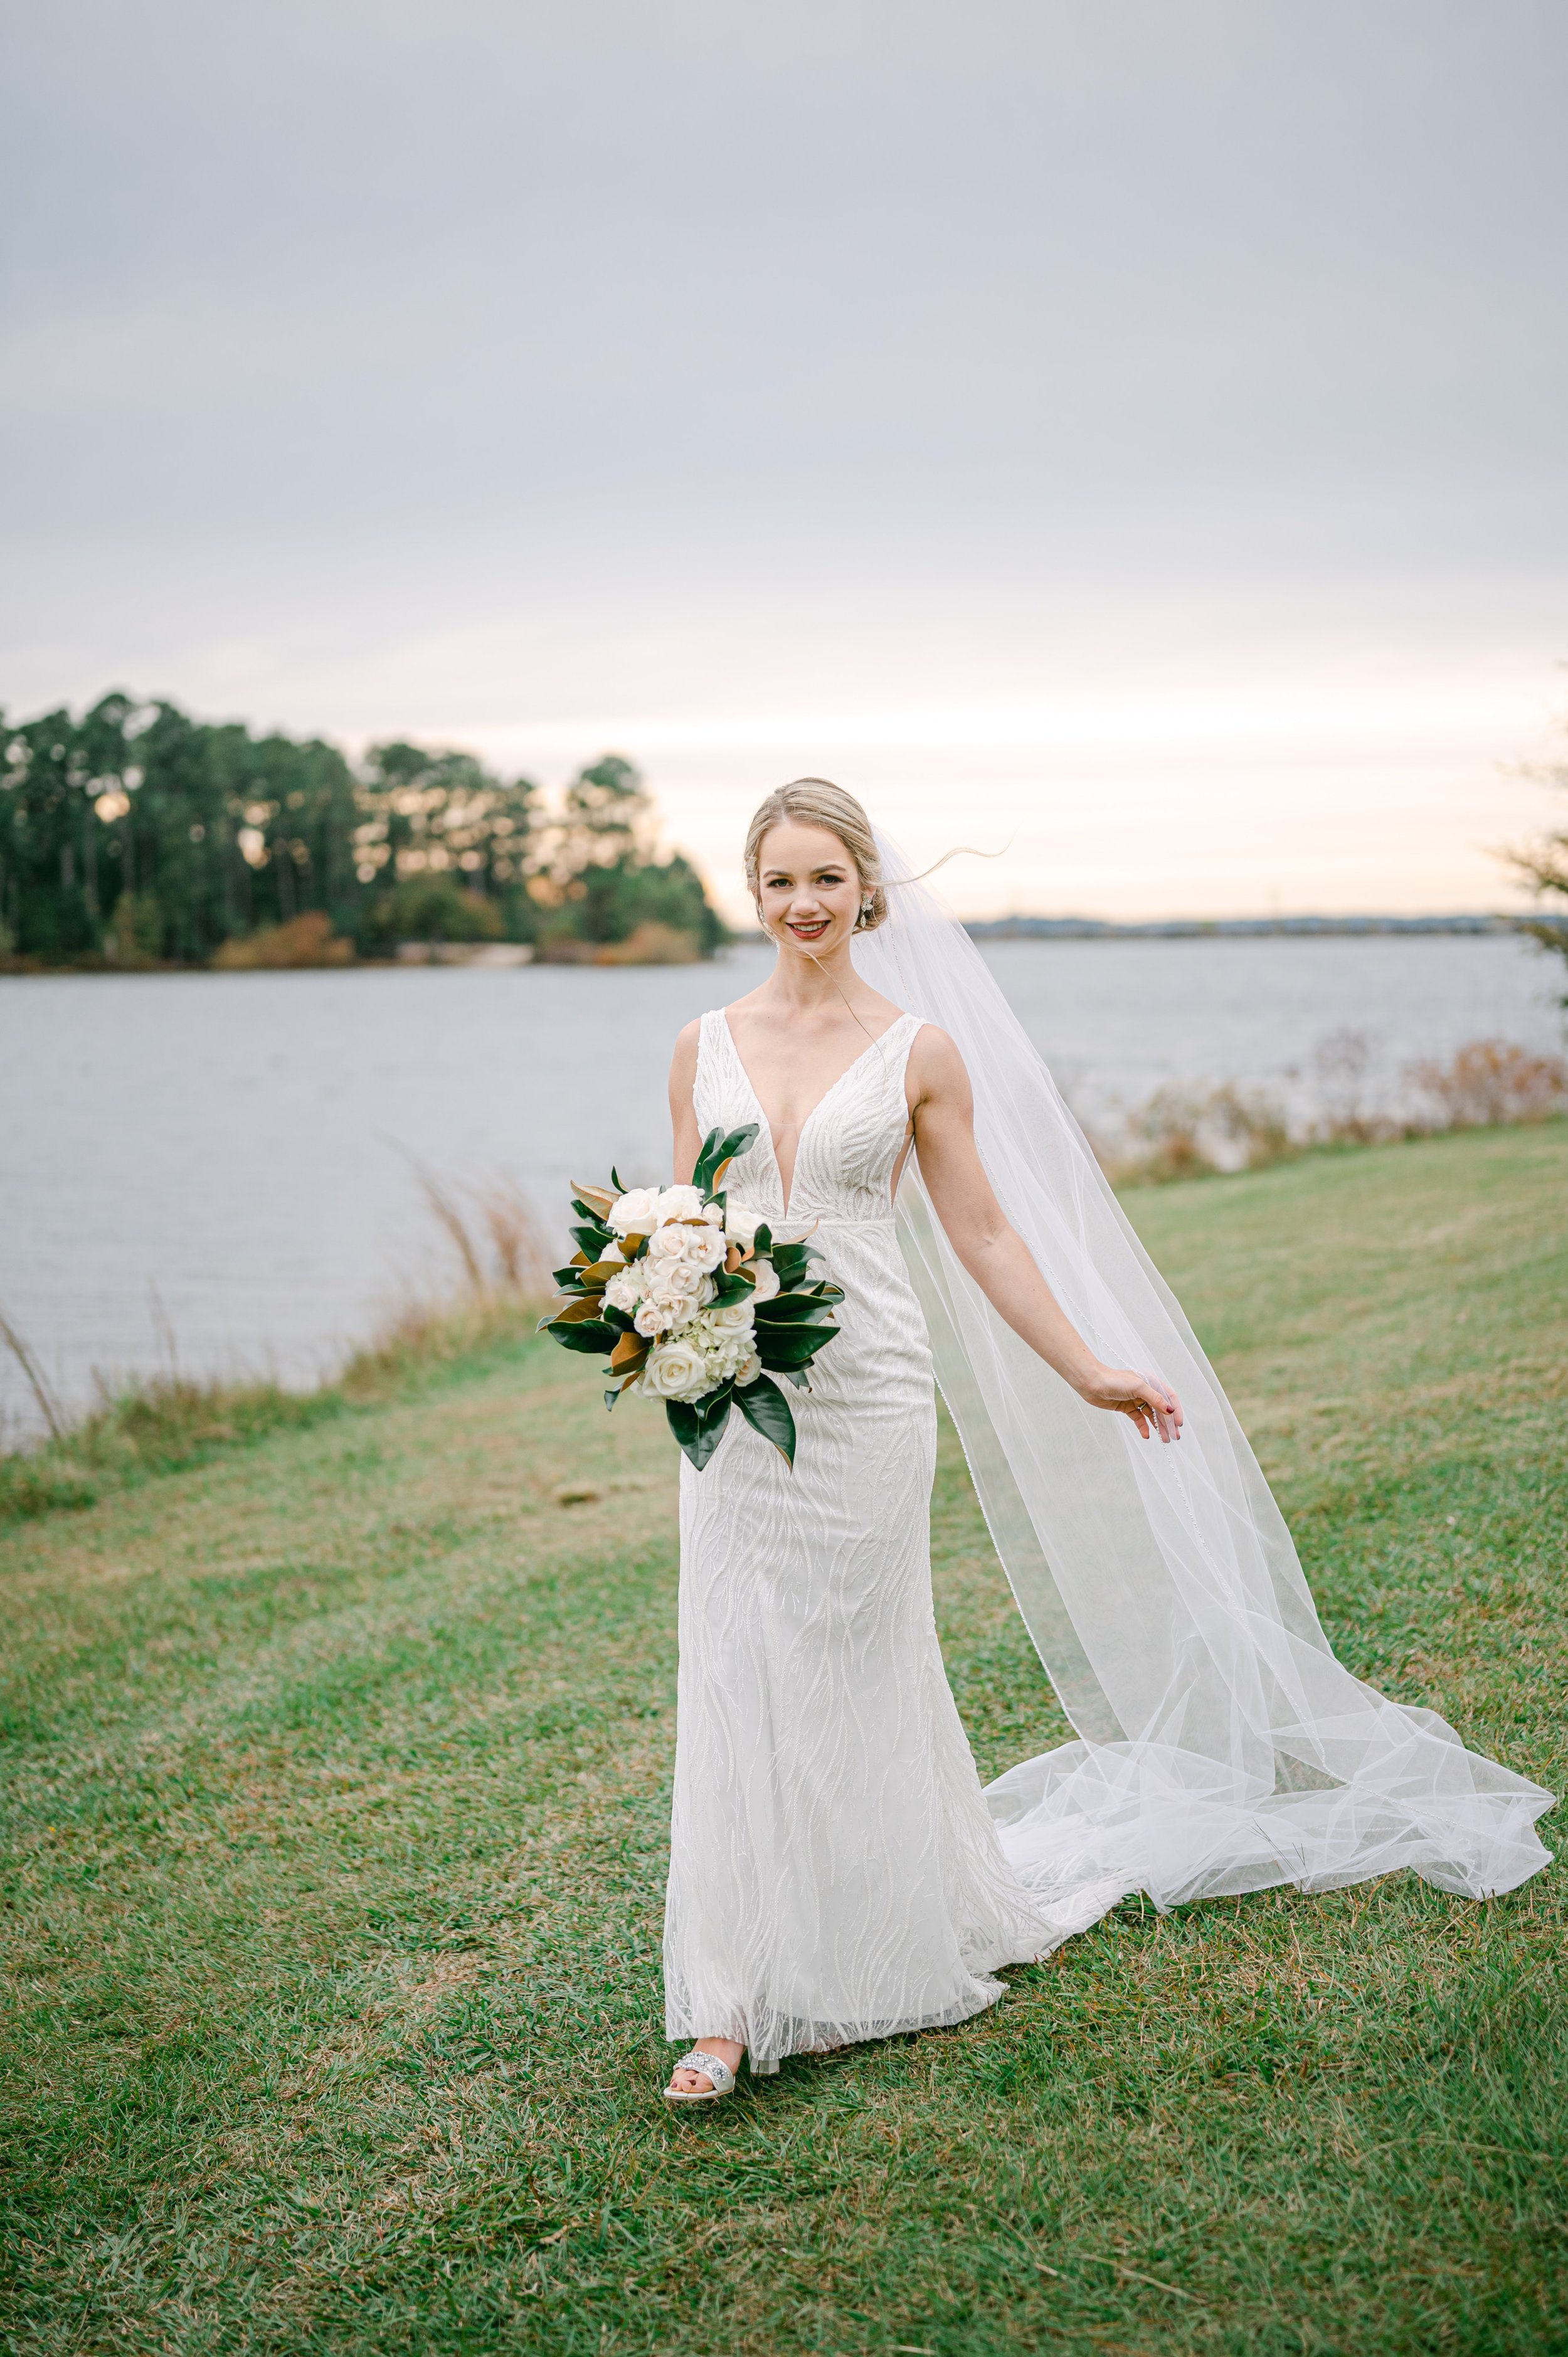 ivory-and-beau-bride-taylor-real-bride-ryder-made-with-love-wedding-dress-bridal-gown-wedding-gown-classic-bride-savannah-bridal-shop-bridal-boutique-bridal-shopping-bridal-style-bridal-inspo-2021-11-6 Taylor-and-Ben-Augusta-Wedding-Photographer145.jpg